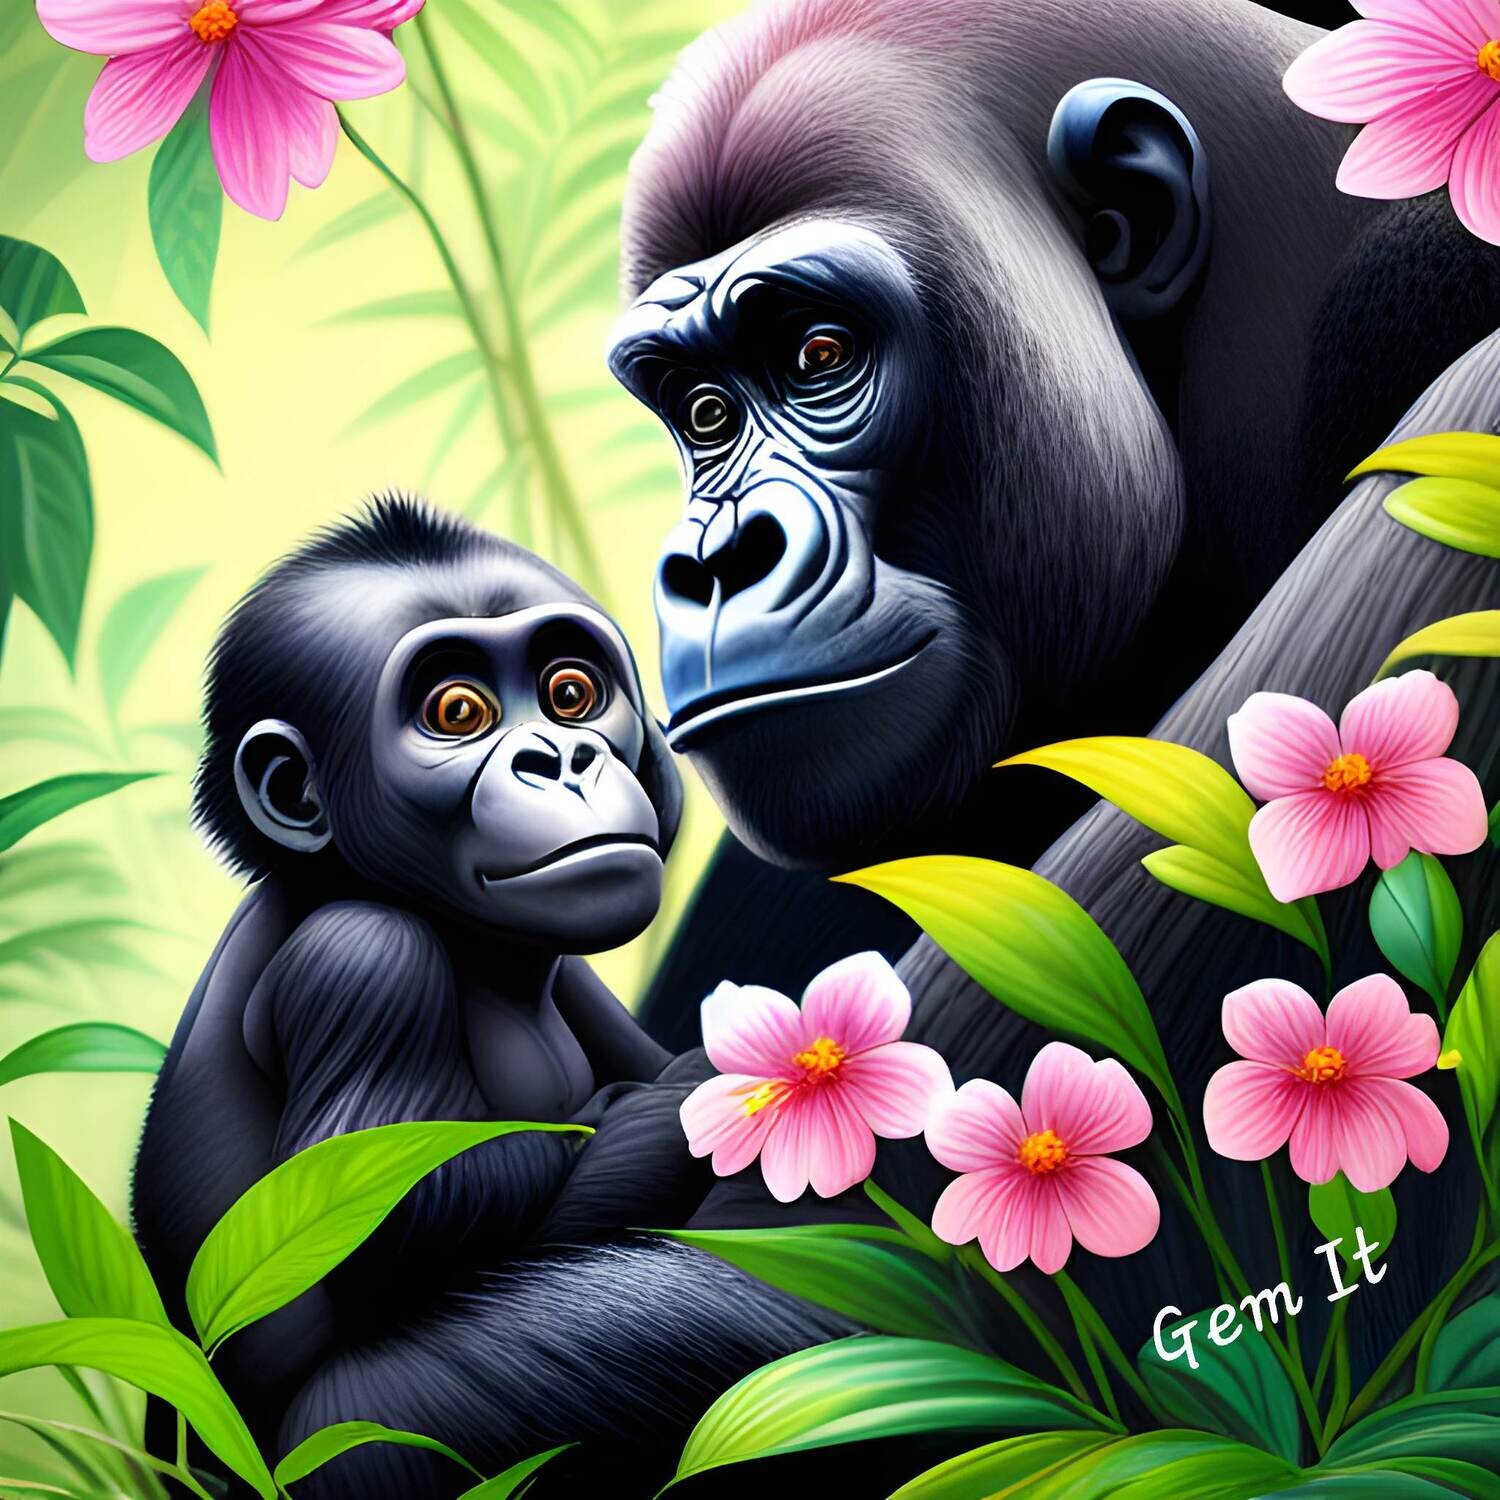 Mother and Baby Gorilla 743 - Full Drill Diamond Painting - Specially ordered for you. Delivery is approximately 4 - 6 weeks.